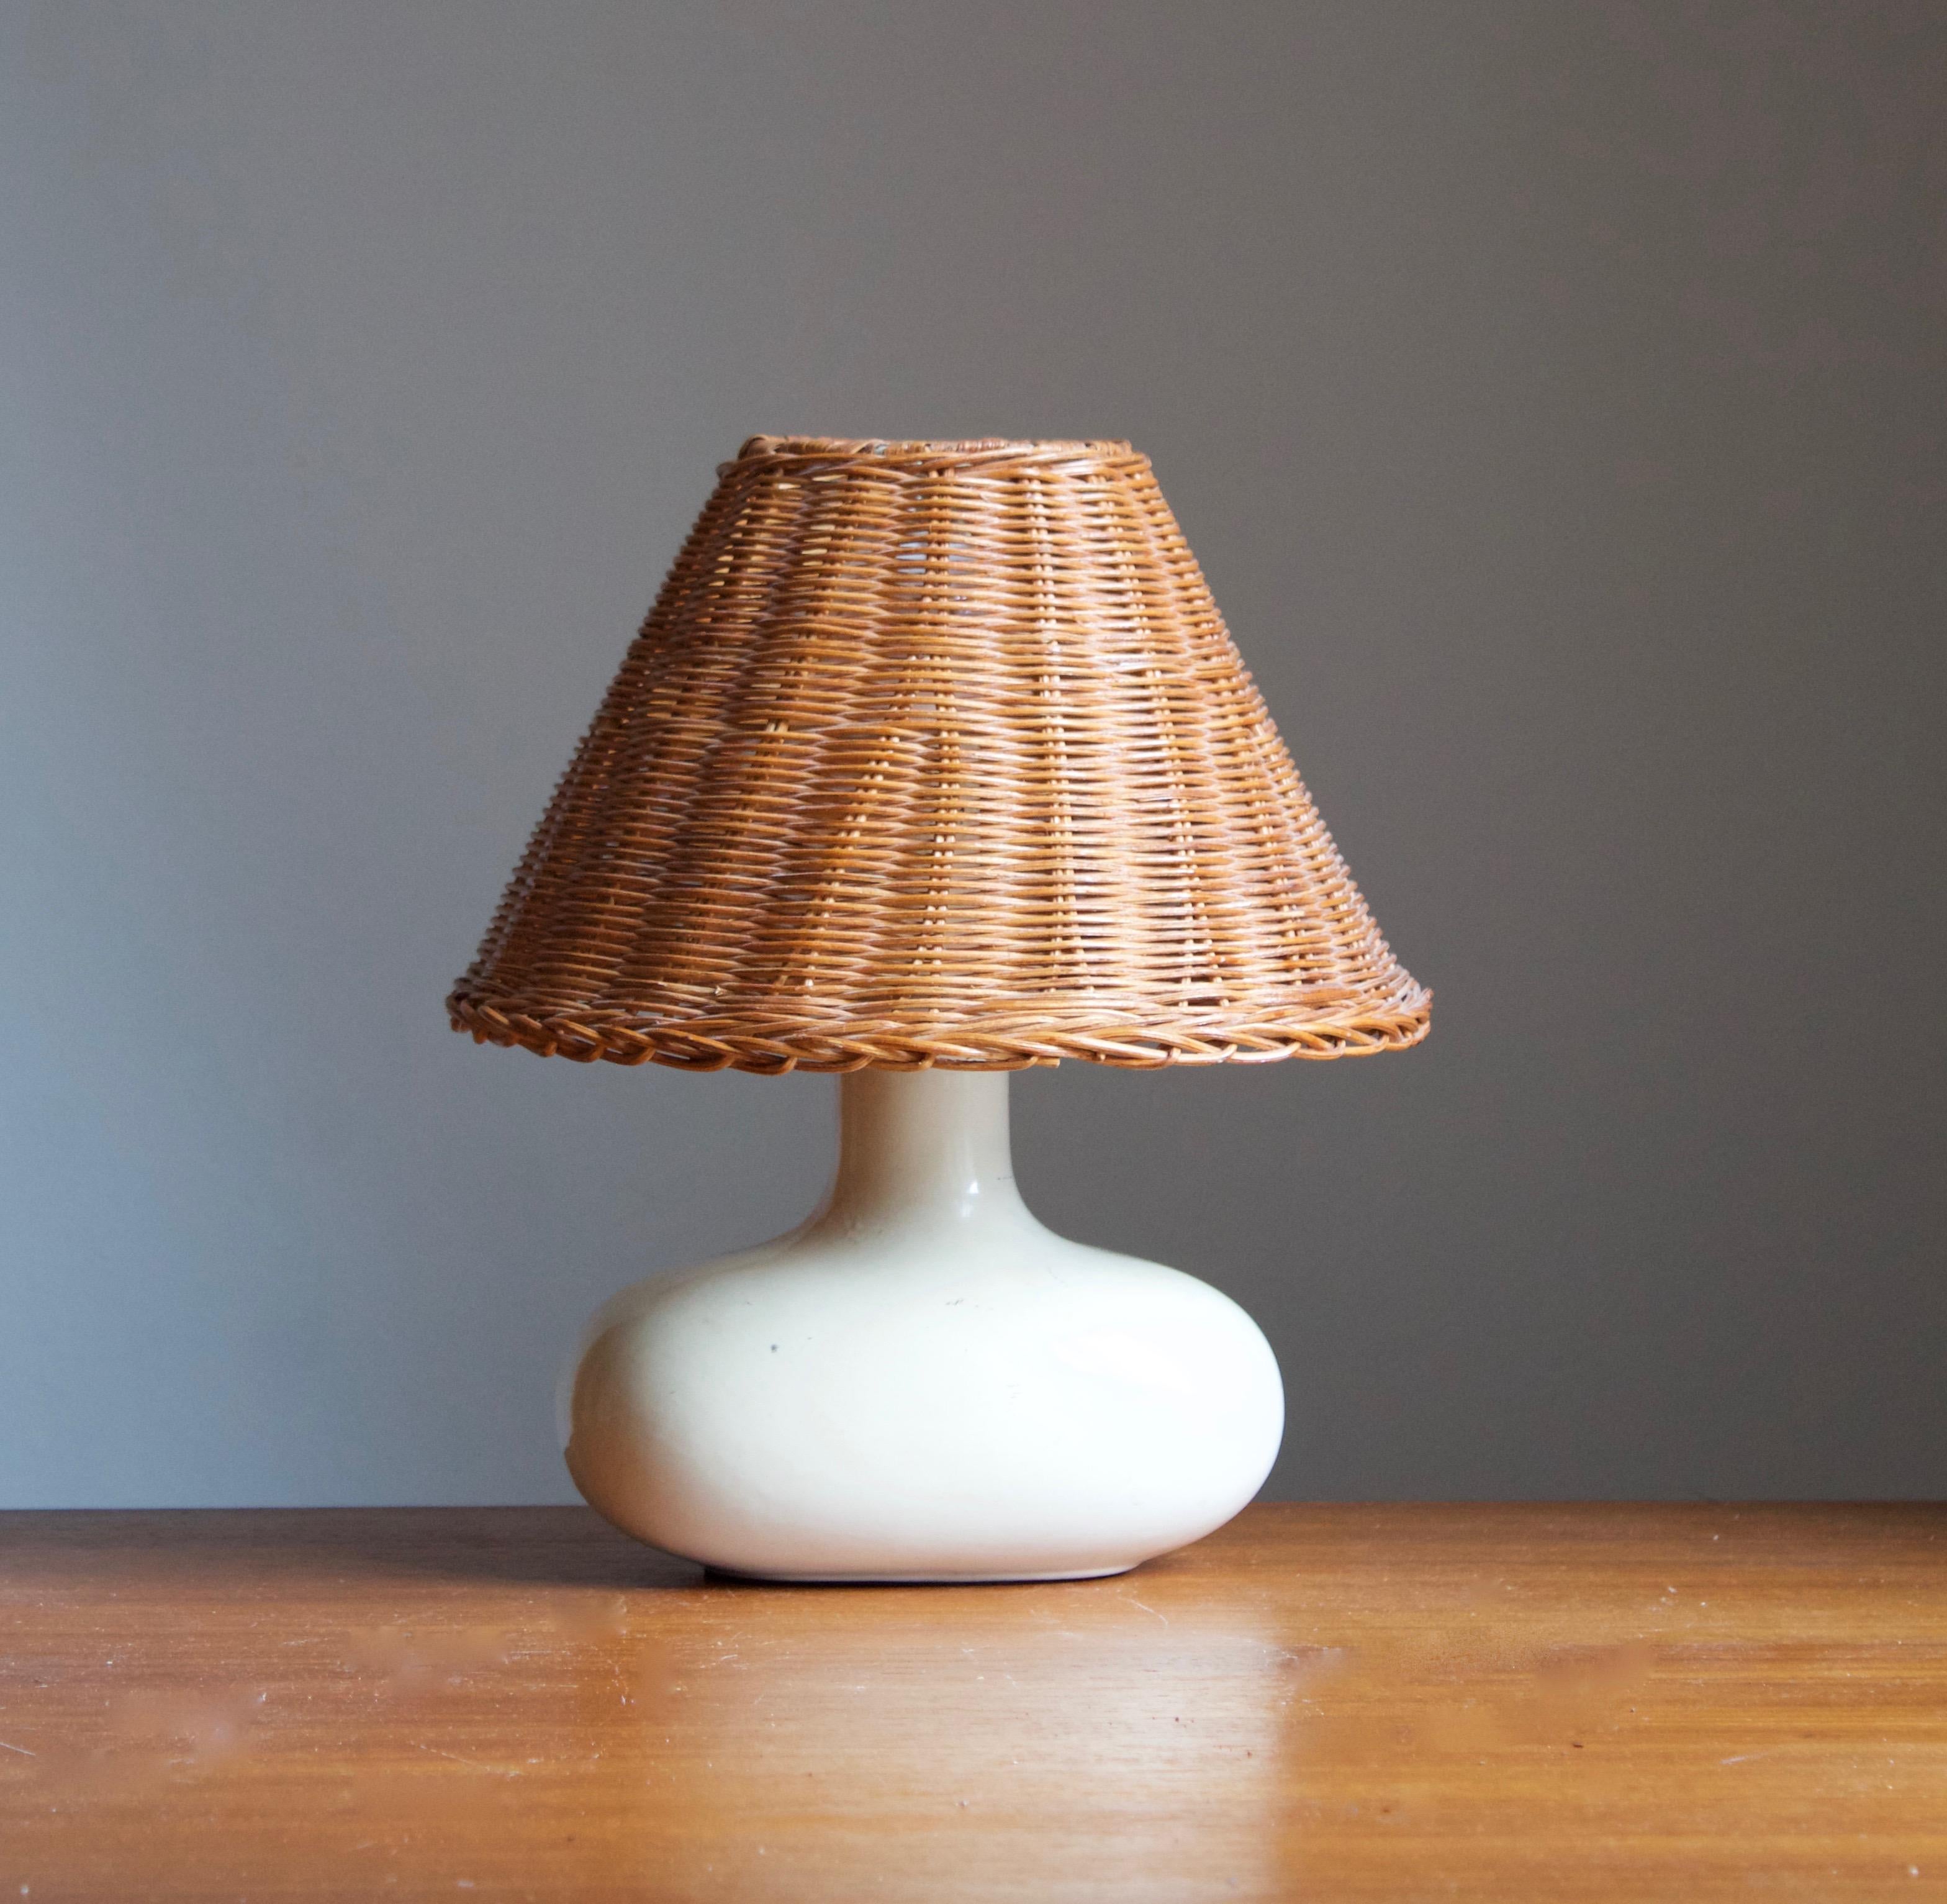 A table lamps. In glazed ceramic. Assorted vintage rattan lampshade. Produced by Markslöjd, Kinna, Sweden, c. 1970s. Marked 

Stated dimensions exclude lampshade. Height includes socket.

Glaze features a white color.